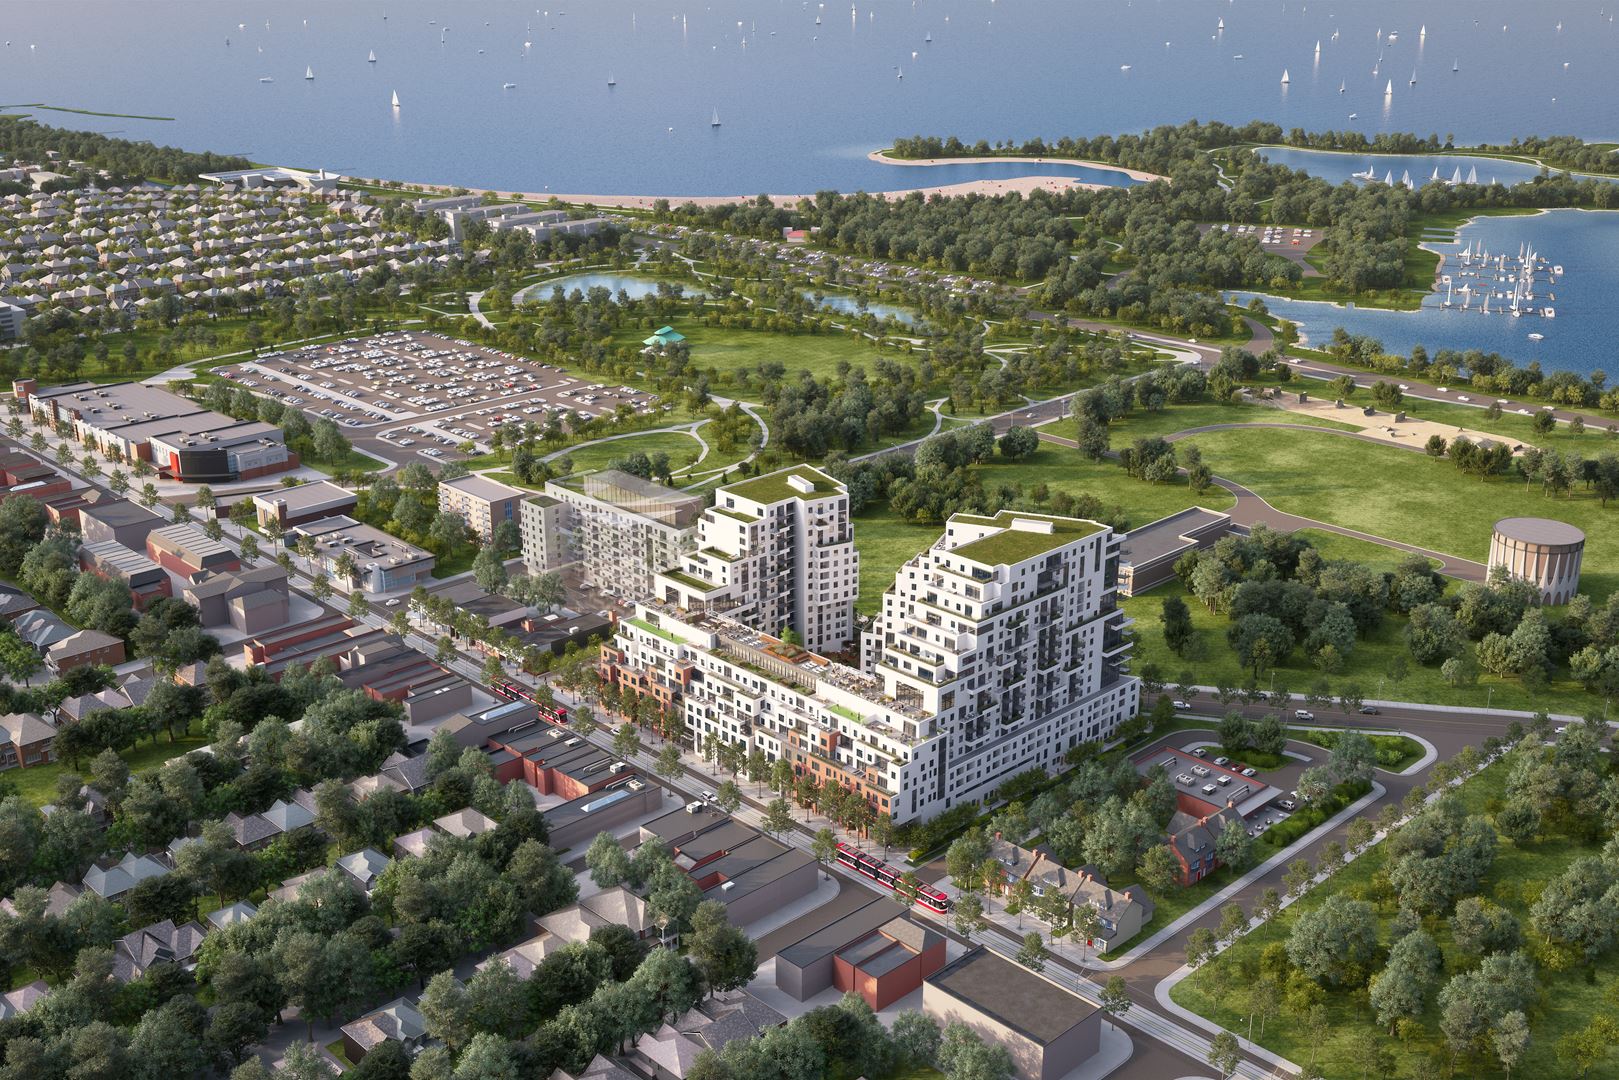 Latest Developments: Condo-Beach Living Coming To The East End